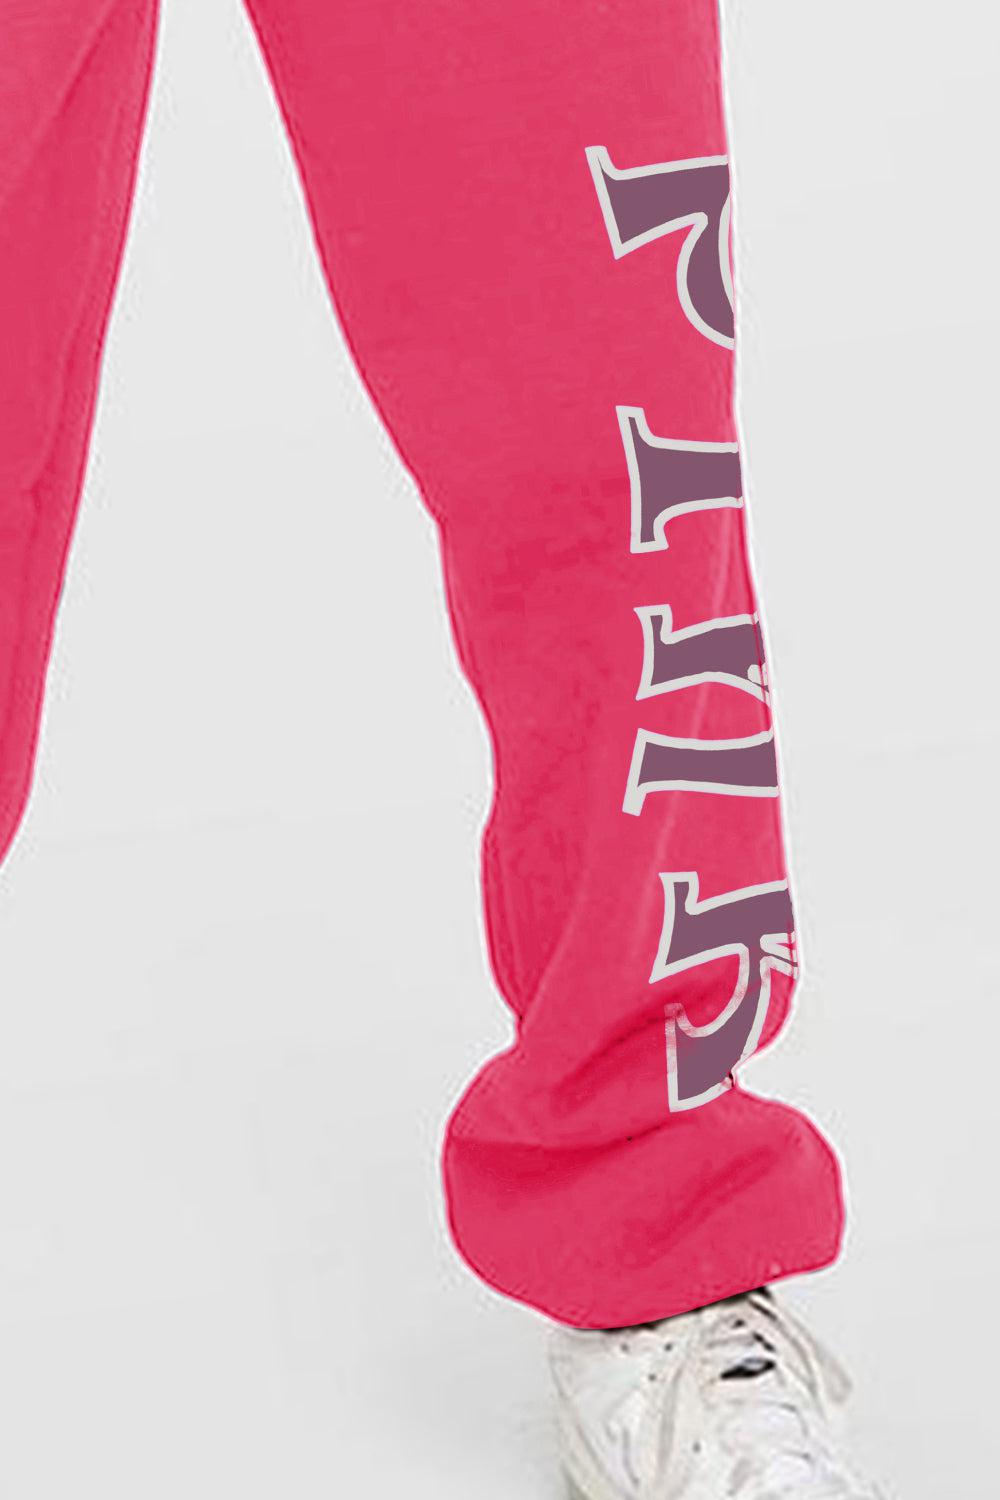 Simply Love Full Size PINK Graphic Sweatpants - Blue Zone Planet